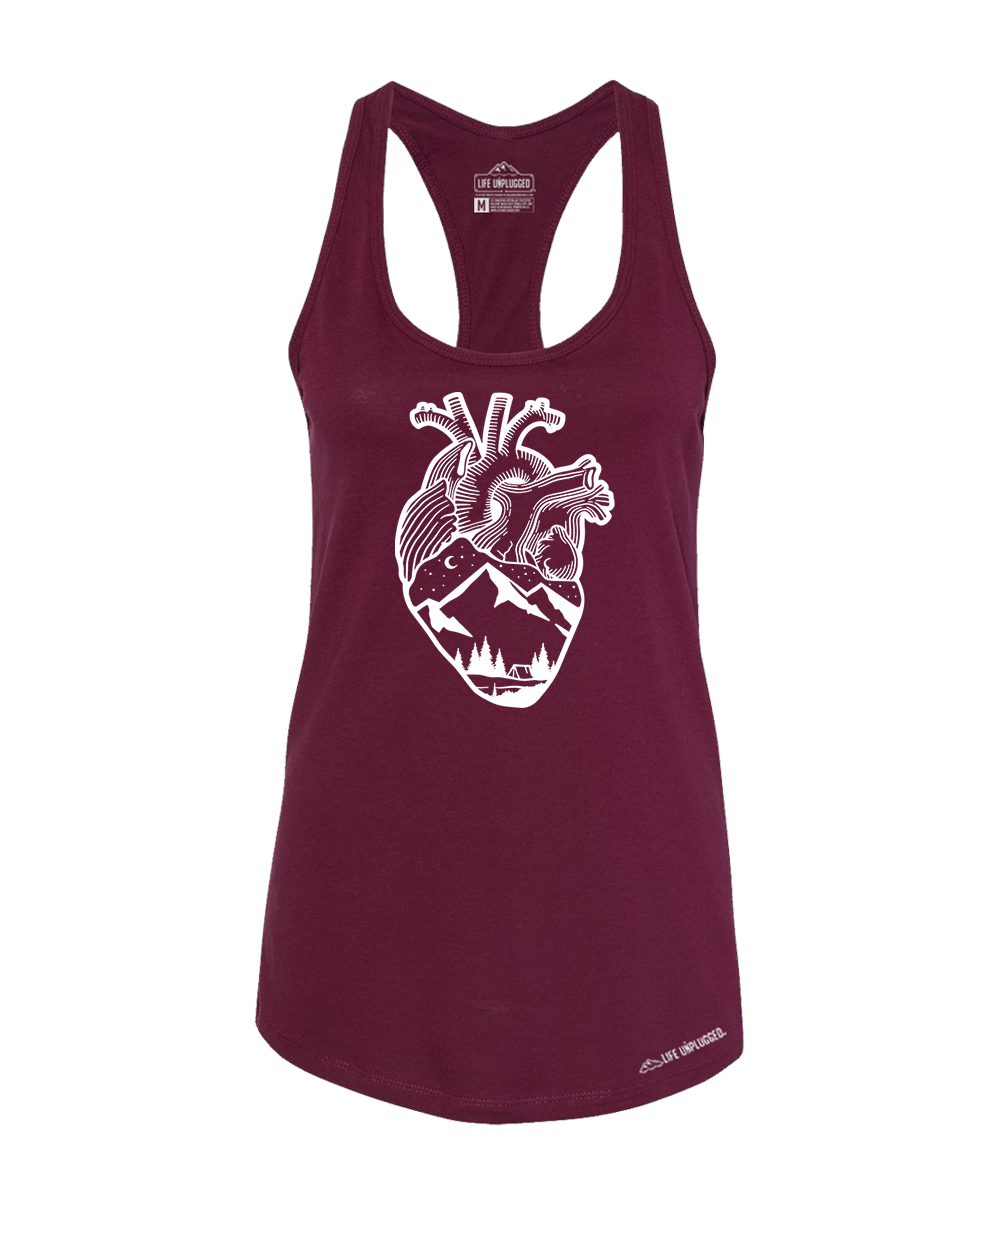 Anatomical Heart (Full Chest) Premium Women's Relaxed Fit Racerback Tank Top